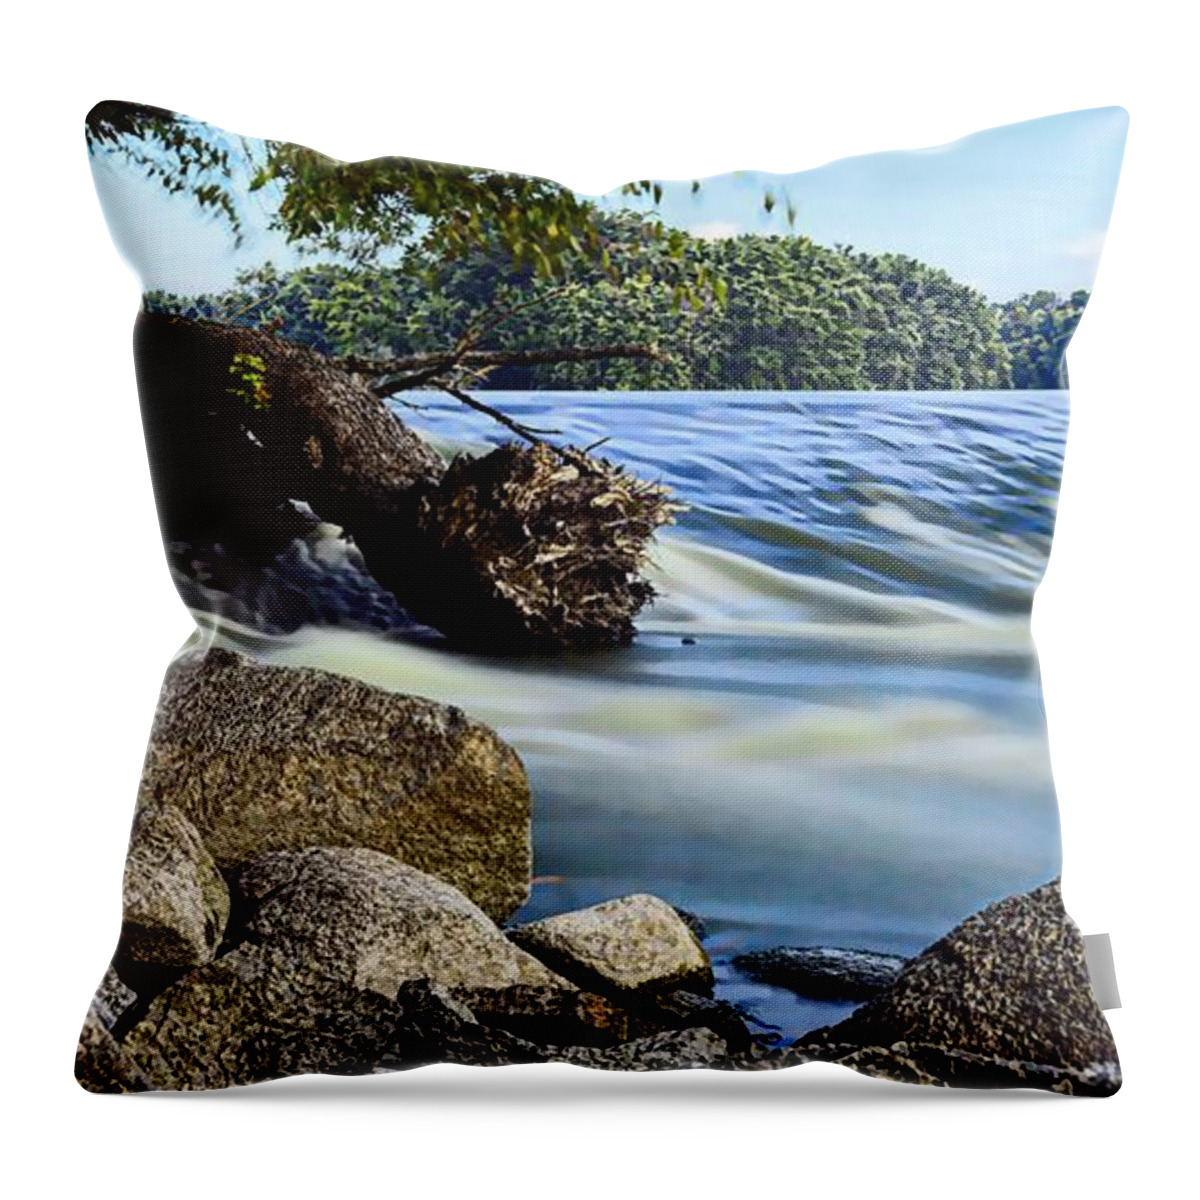 Dam Throw Pillow featuring the photograph Low Head by Bonfire Photography